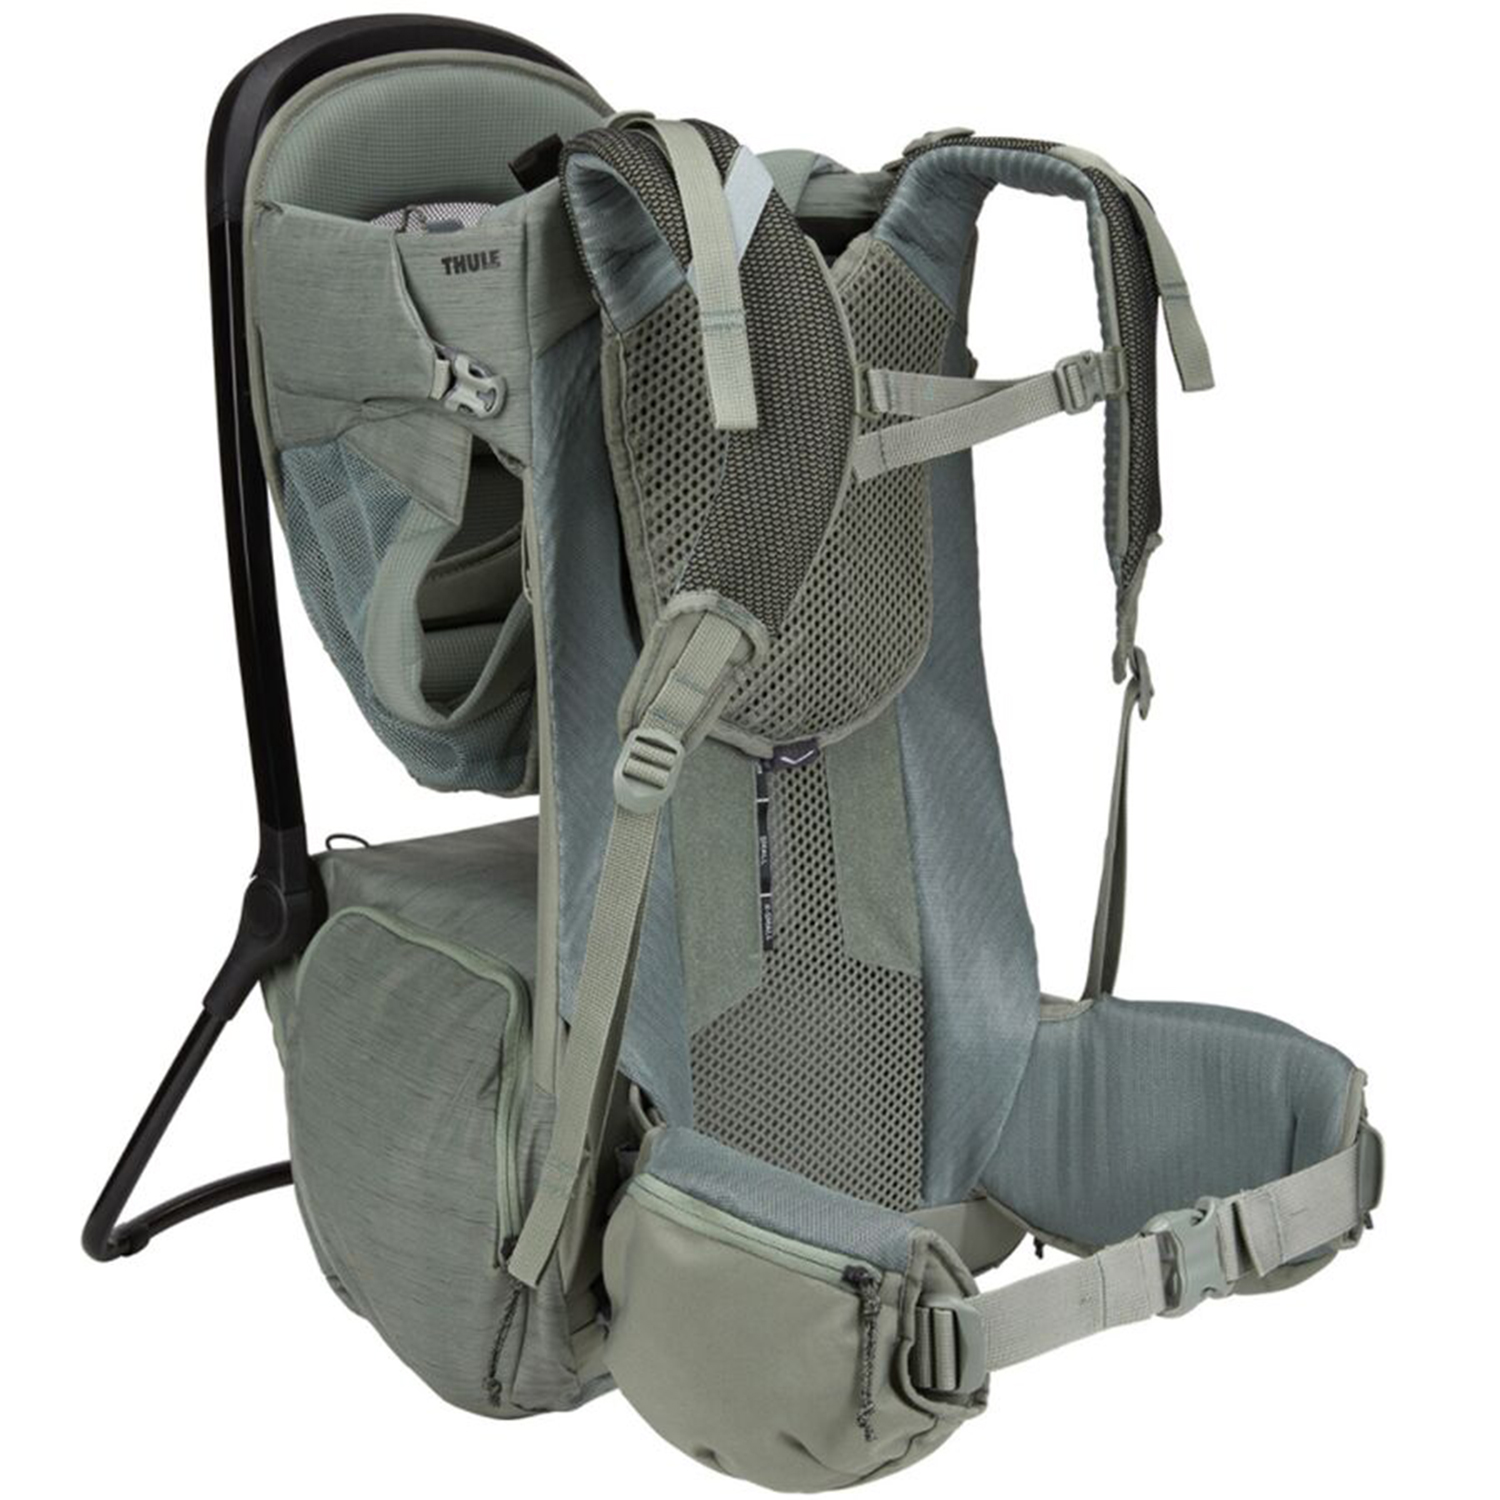 Best Hiking Carrier for Toddlers: Thule Sapling Child Carrier 